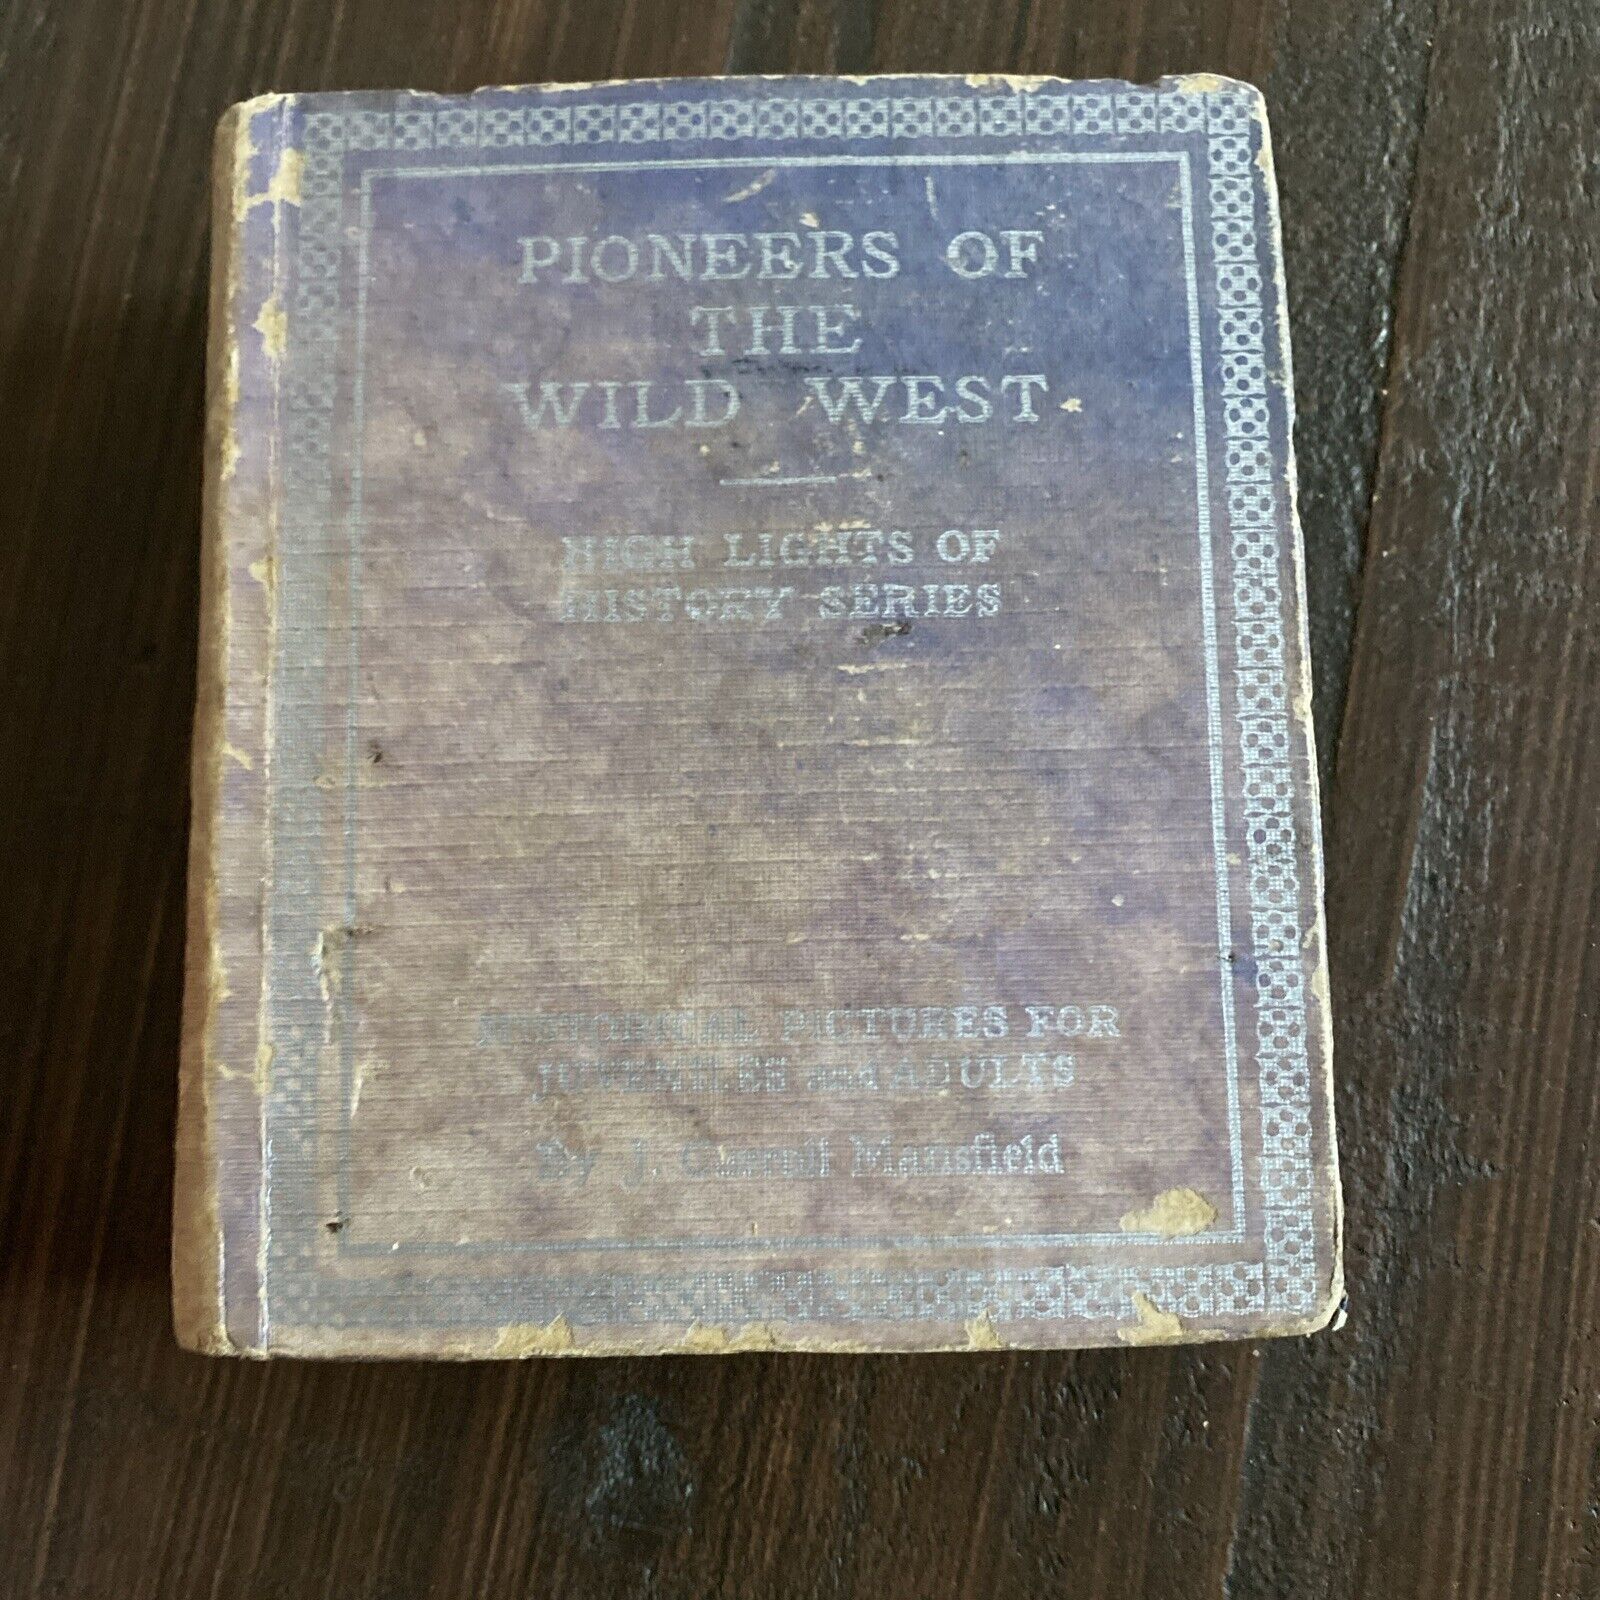 Small Old Book titled--PIONEERS OF THE WILD WEST  -by J. Carroll Mansfield